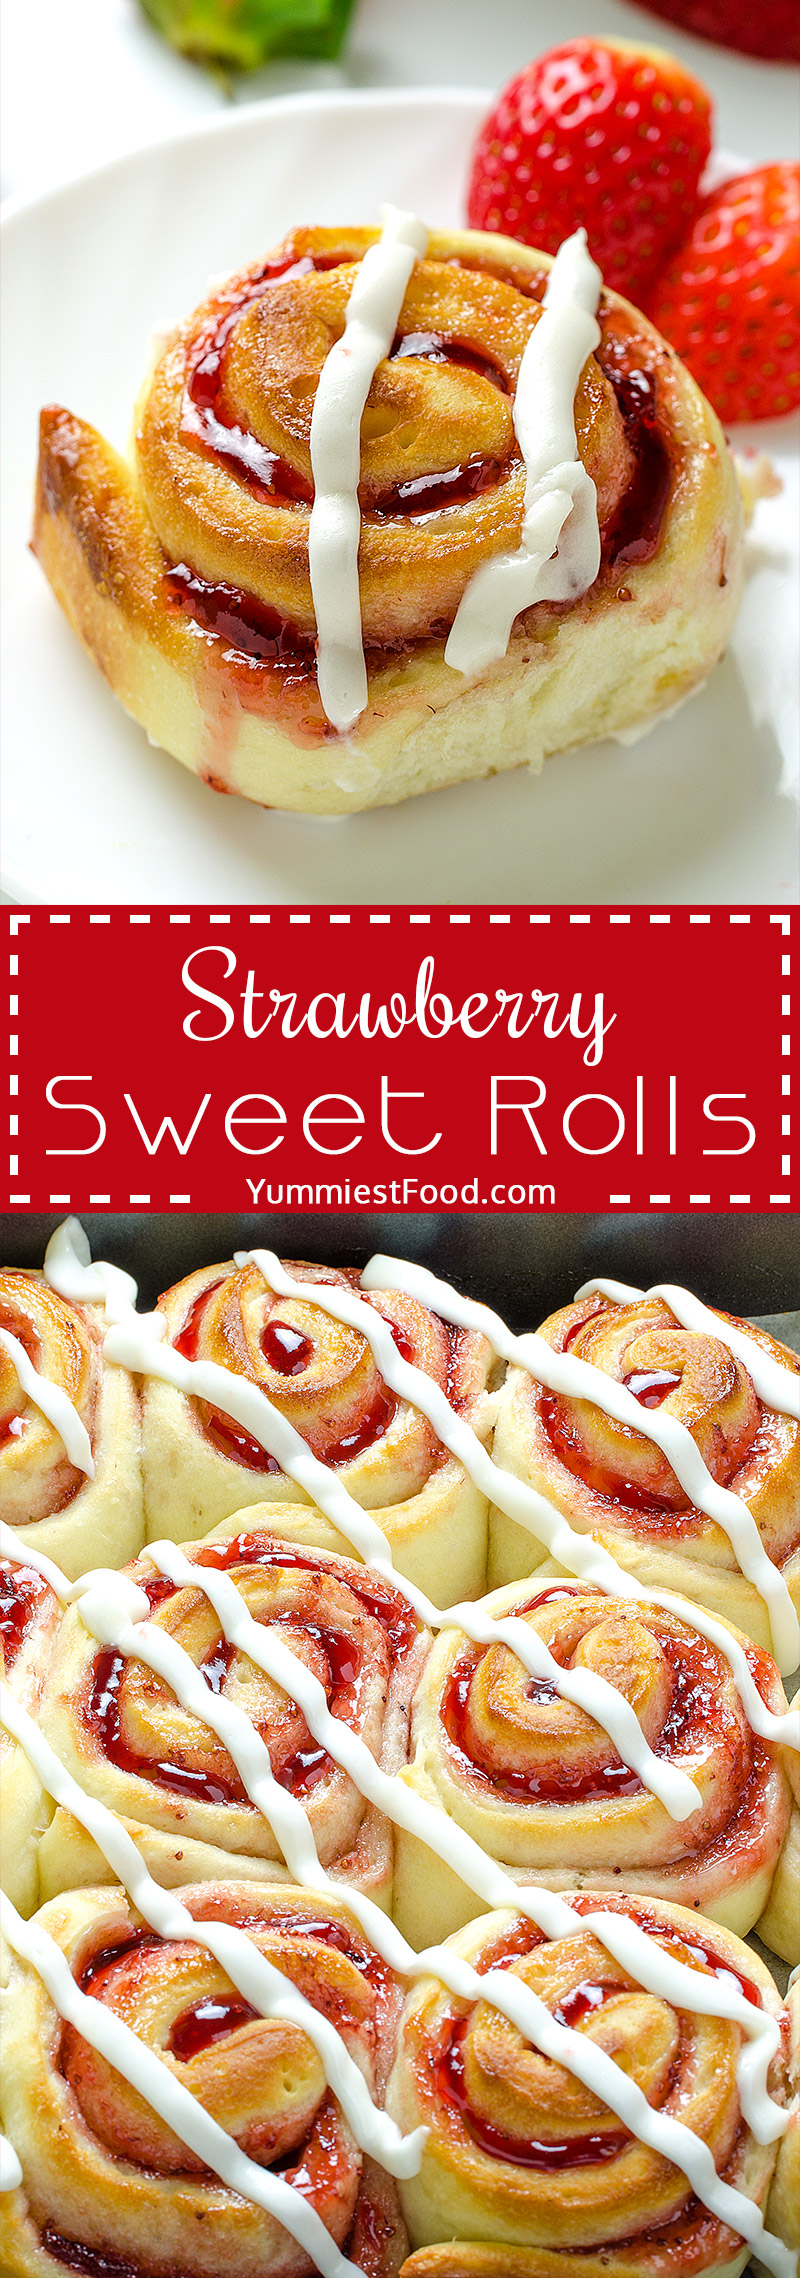 Strawberry Sweet Rolls with Vanilla Cream Cheese Glaze - moist, delicious and tasty